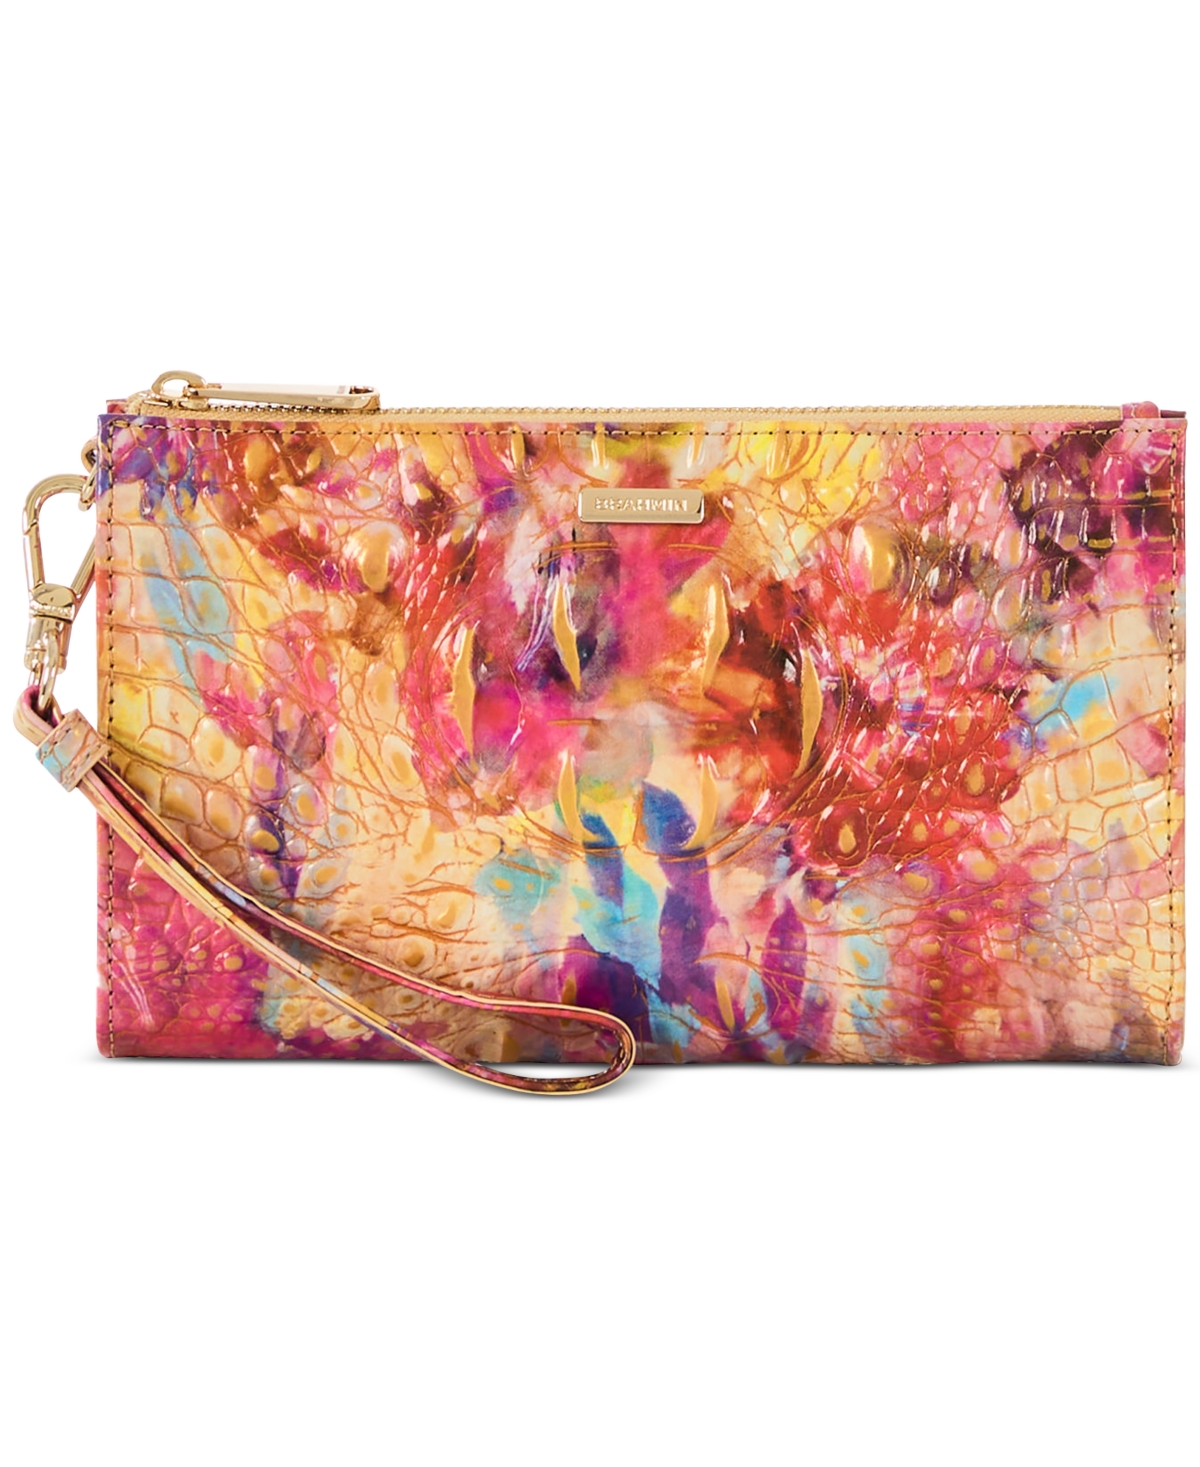 Daisy Melbourne Embossed Leather Clutch - Happy Hour